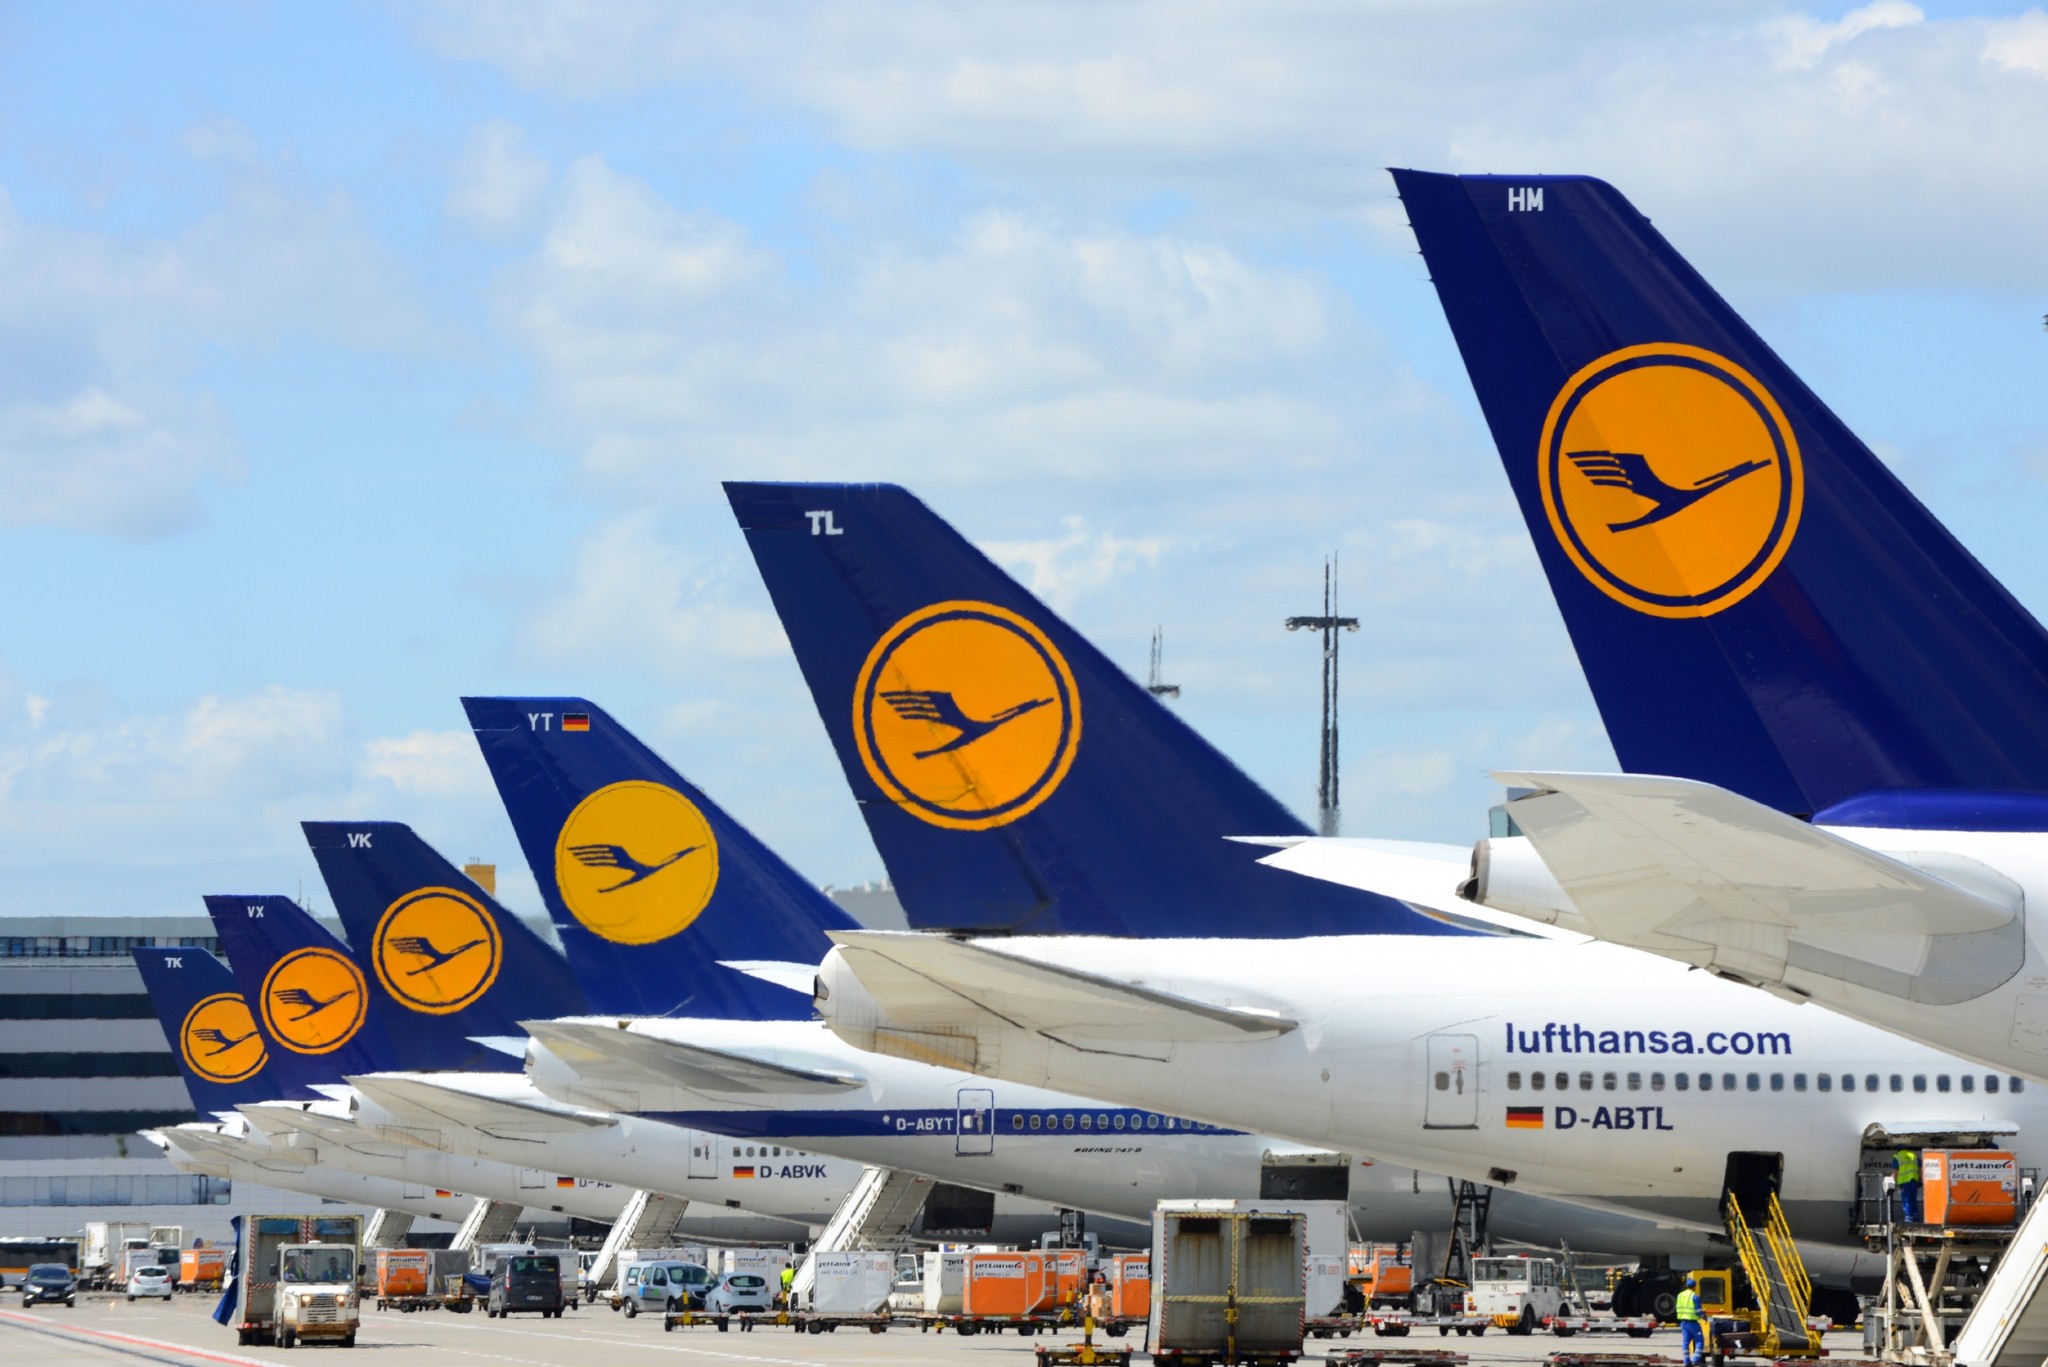 Lufthansa adds fifth daily service on Dublin to Frankfurt route